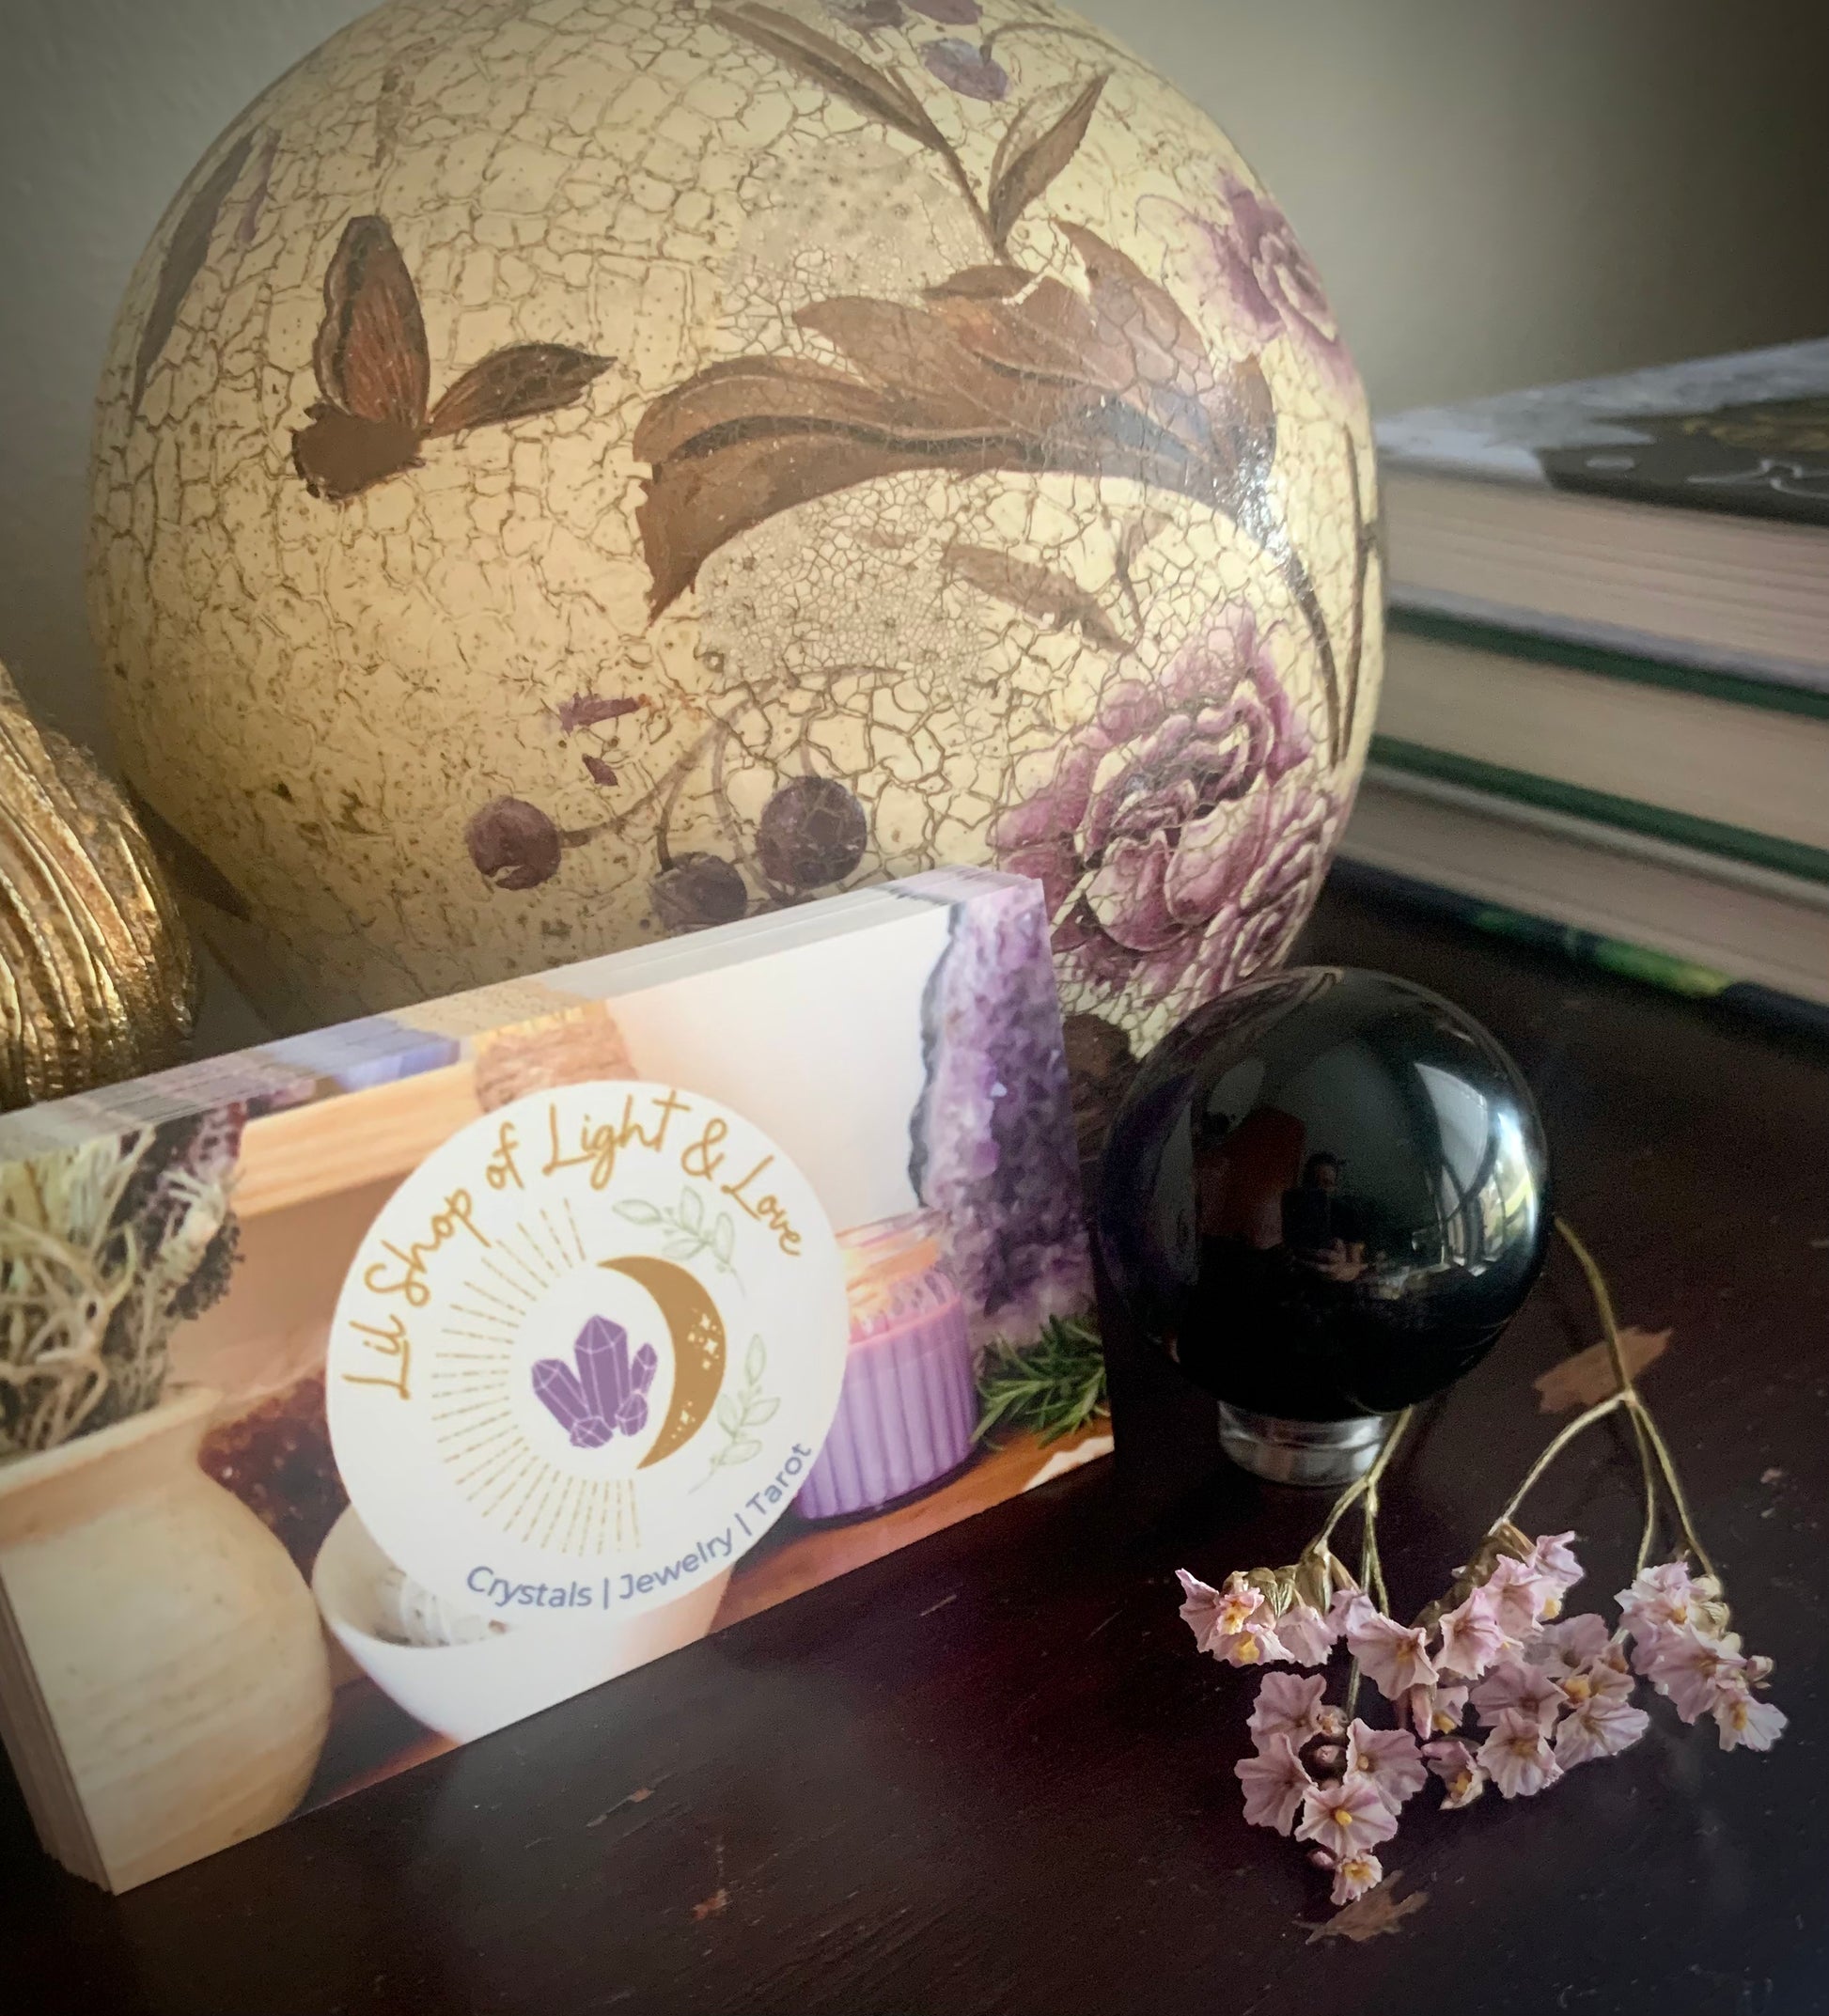 Black obsidian sphere displayed on a dark wooden desk next to business cards for lil shop and dried pink flowers 